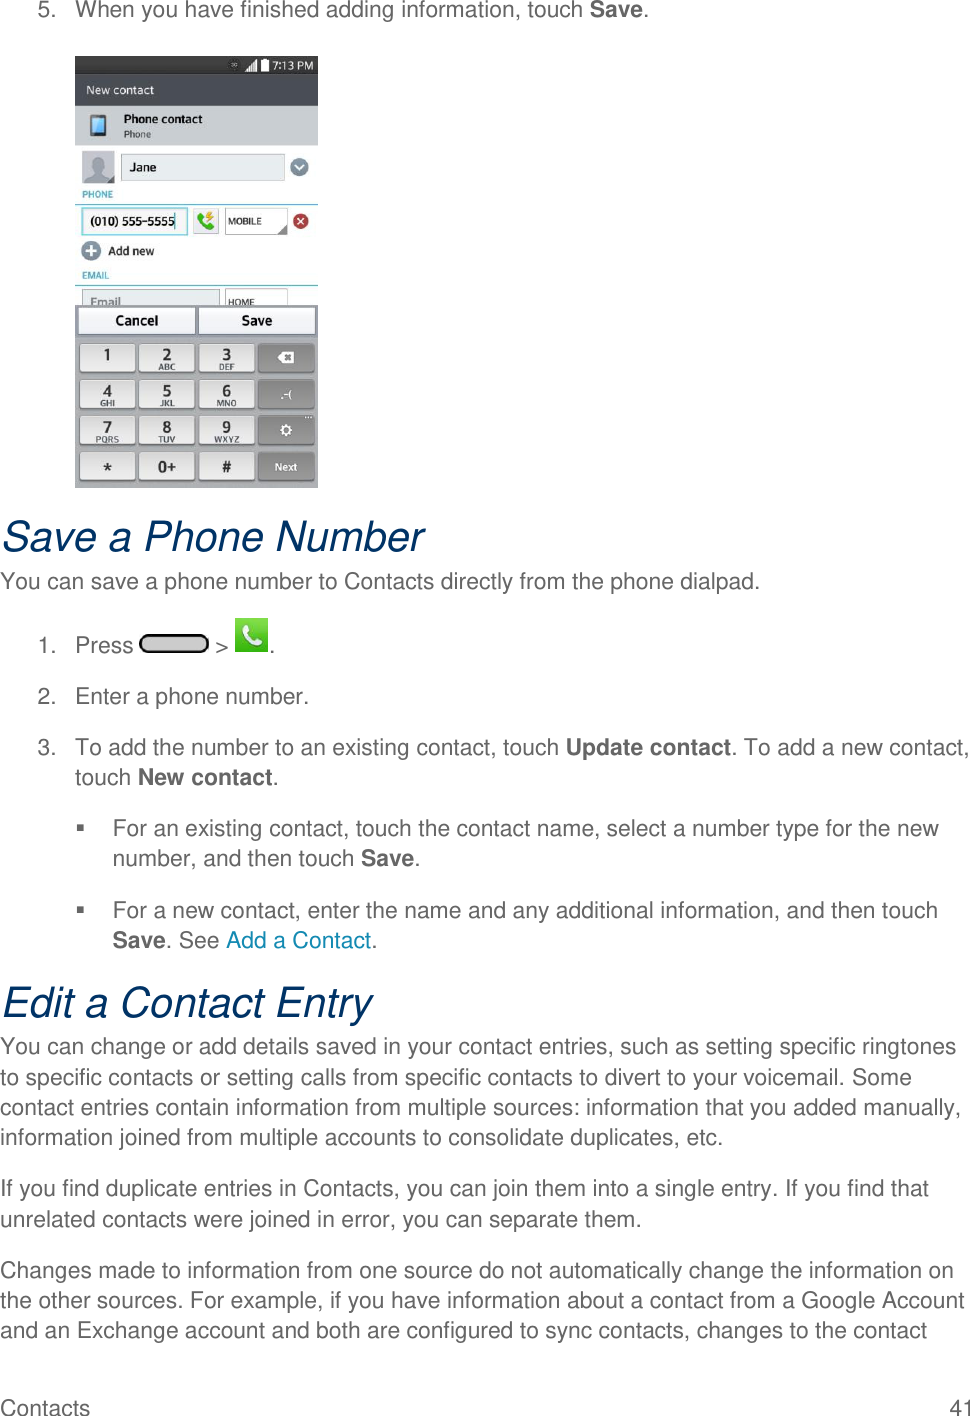 Contacts  41 5.  When you have finished adding information, touch Save.   Save a Phone Number You can save a phone number to Contacts directly from the phone dialpad. 1.  Press   &gt;  . 2.  Enter a phone number. 3.  To add the number to an existing contact, touch Update contact. To add a new contact, touch New contact.   For an existing contact, touch the contact name, select a number type for the new number, and then touch Save.   For a new contact, enter the name and any additional information, and then touch Save. See Add a Contact. Edit a Contact Entry You can change or add details saved in your contact entries, such as setting specific ringtones to specific contacts or setting calls from specific contacts to divert to your voicemail. Some contact entries contain information from multiple sources: information that you added manually, information joined from multiple accounts to consolidate duplicates, etc. If you find duplicate entries in Contacts, you can join them into a single entry. If you find that unrelated contacts were joined in error, you can separate them. Changes made to information from one source do not automatically change the information on the other sources. For example, if you have information about a contact from a Google Account and an Exchange account and both are configured to sync contacts, changes to the contact 